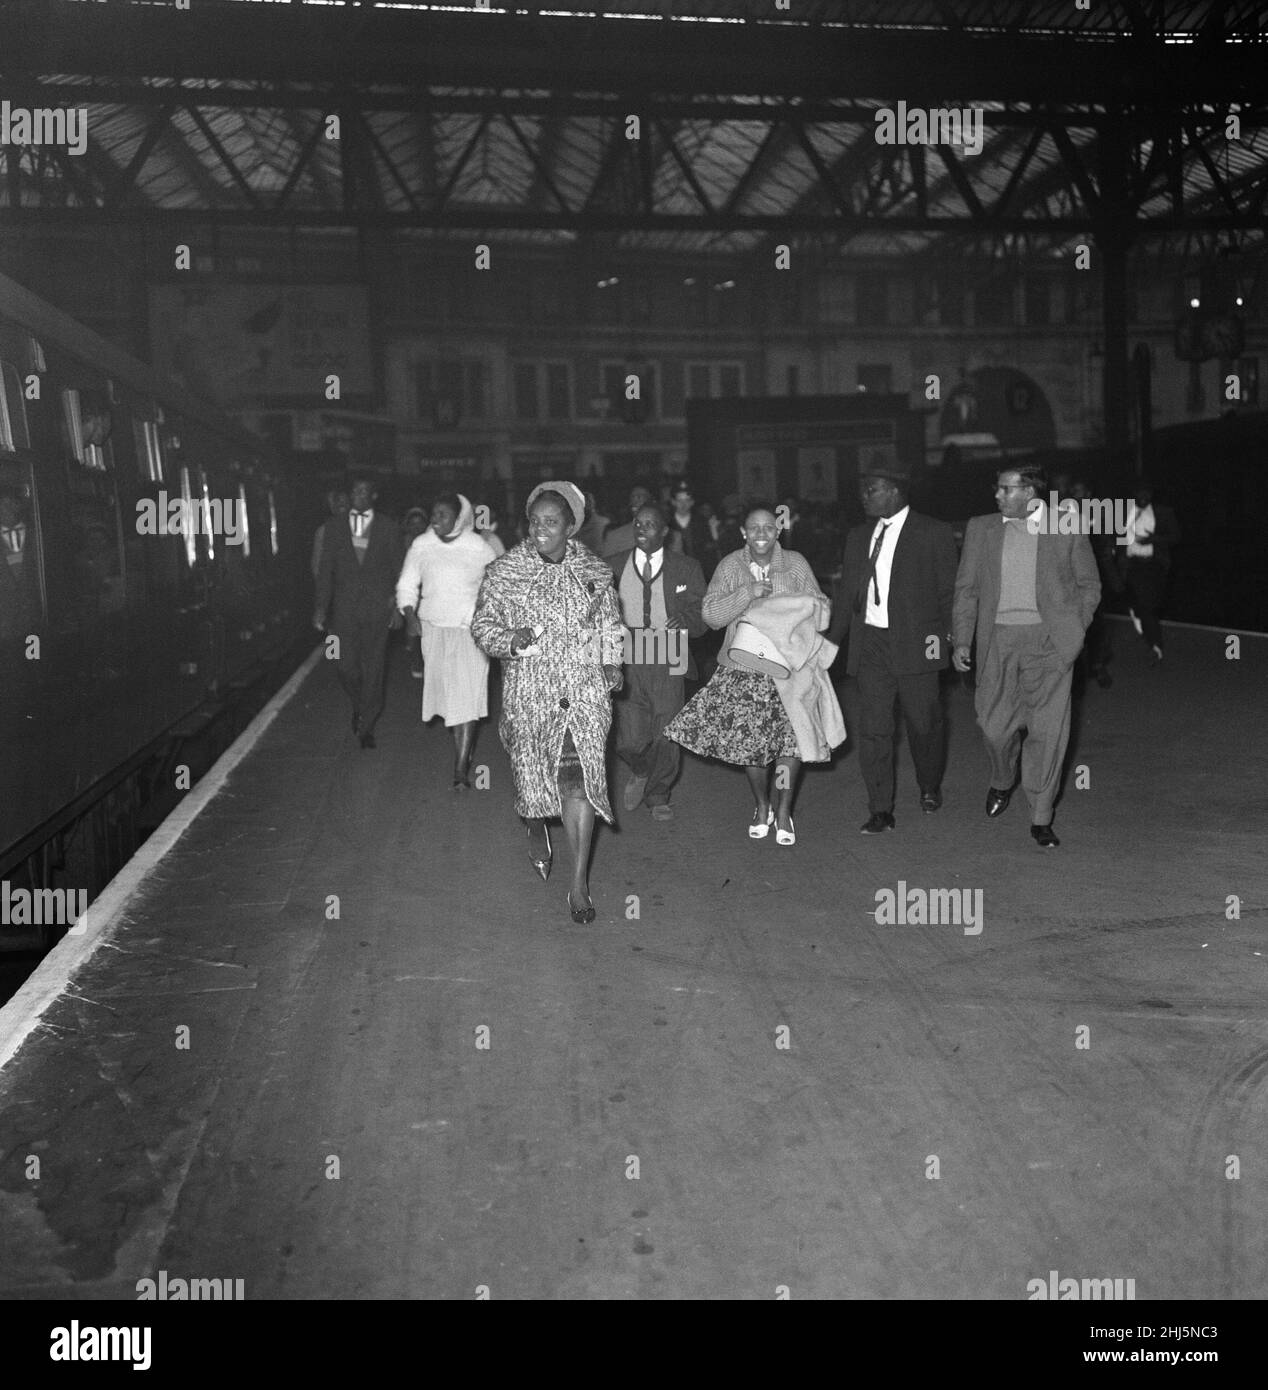 Nearly 1000 West Indian immigrants arrive in three boats trains at Waterloo Station. Many brought with them packing cases containing treasured possessions. 15th October 1961. Stock Photo